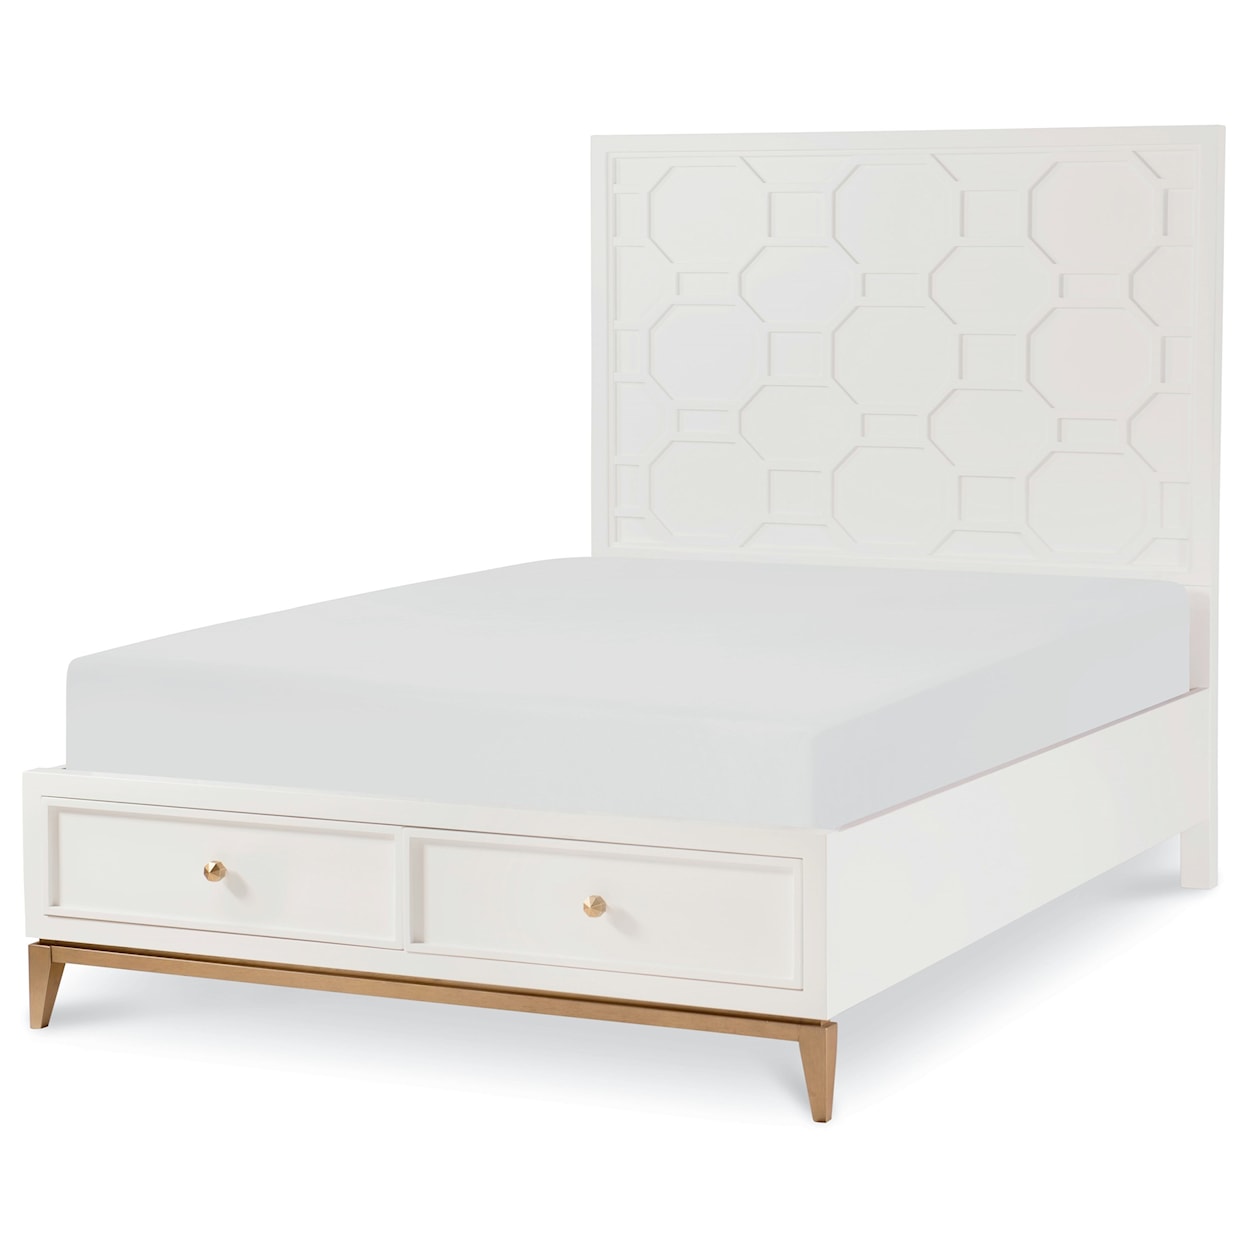 Rachael Ray Home Alexis Full Panel Bed with Storage Footboard